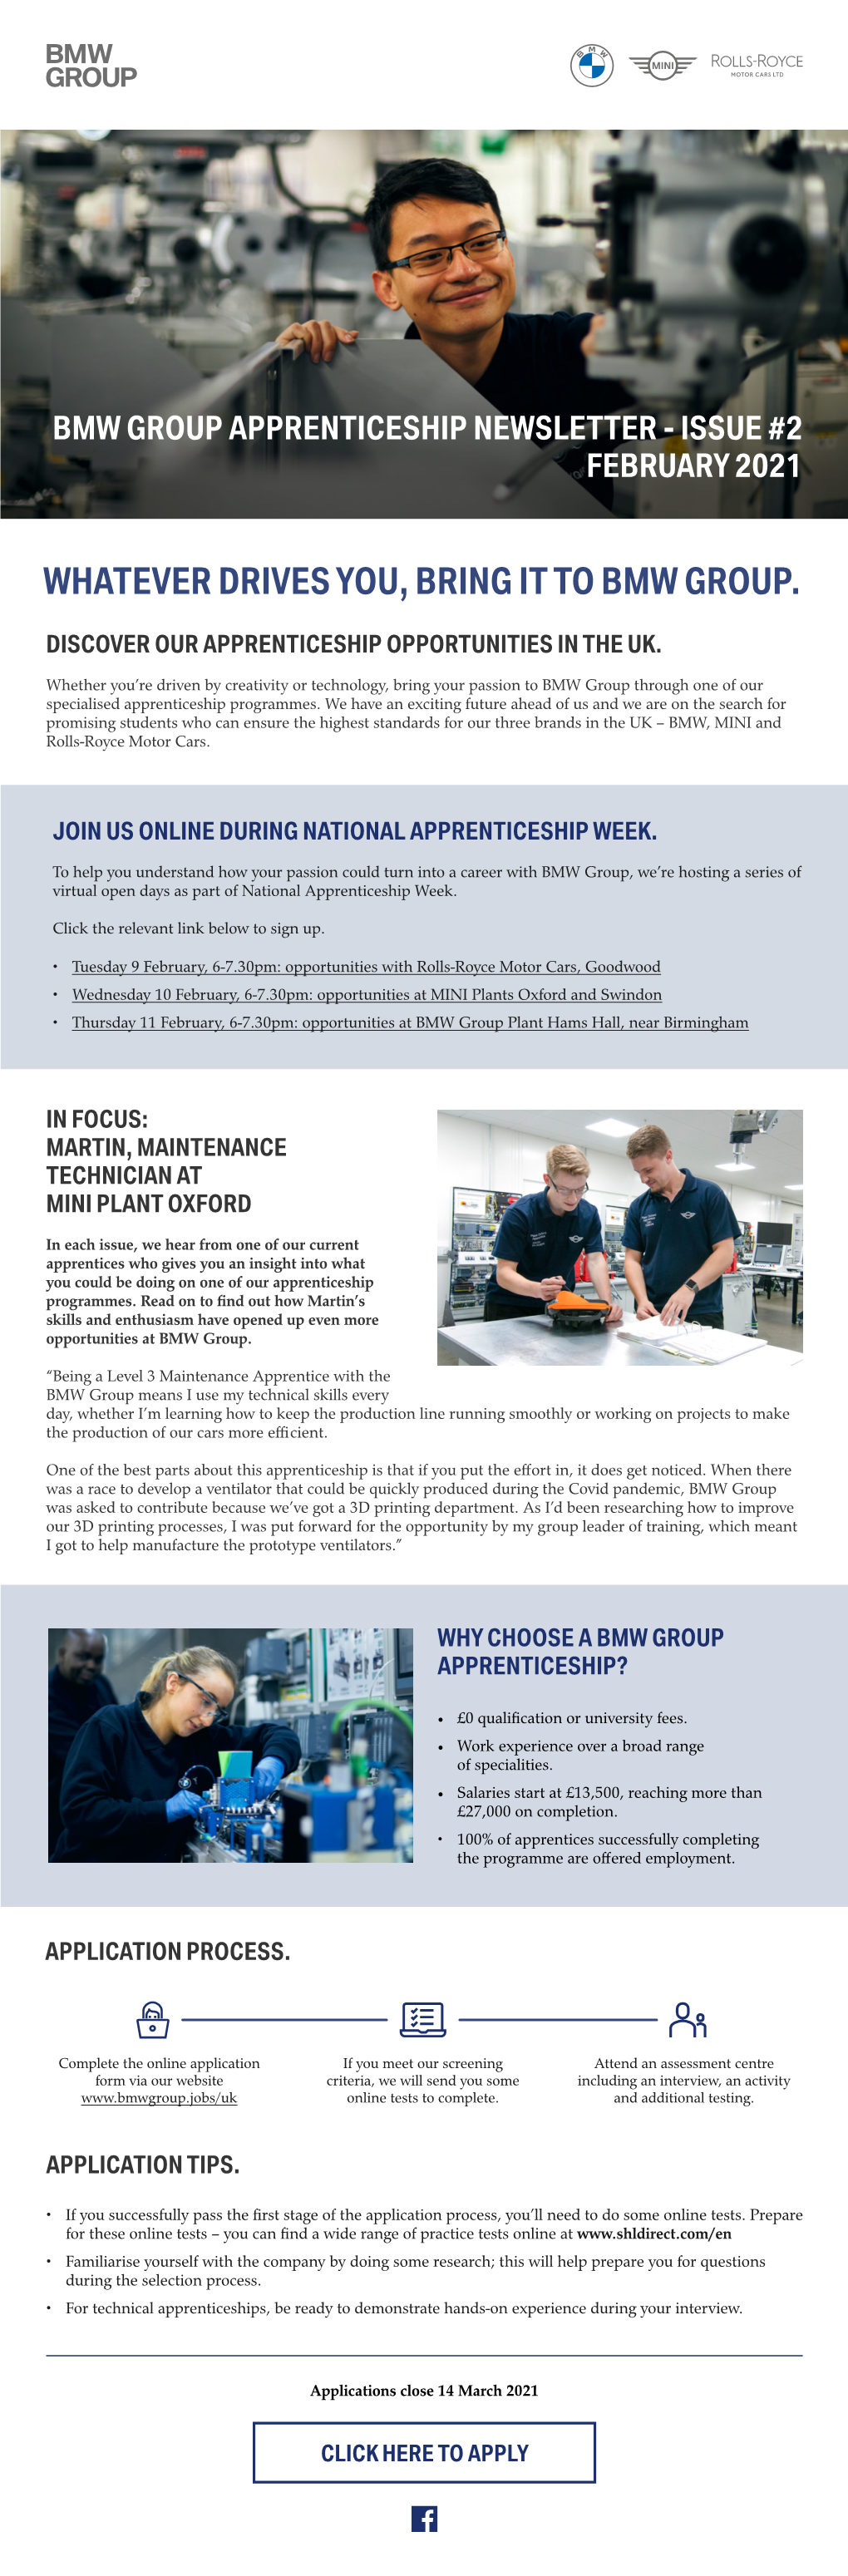 Whatever Drives You, Bring It to Bmw Group. Discover Our Apprenticeship Opportunities in The